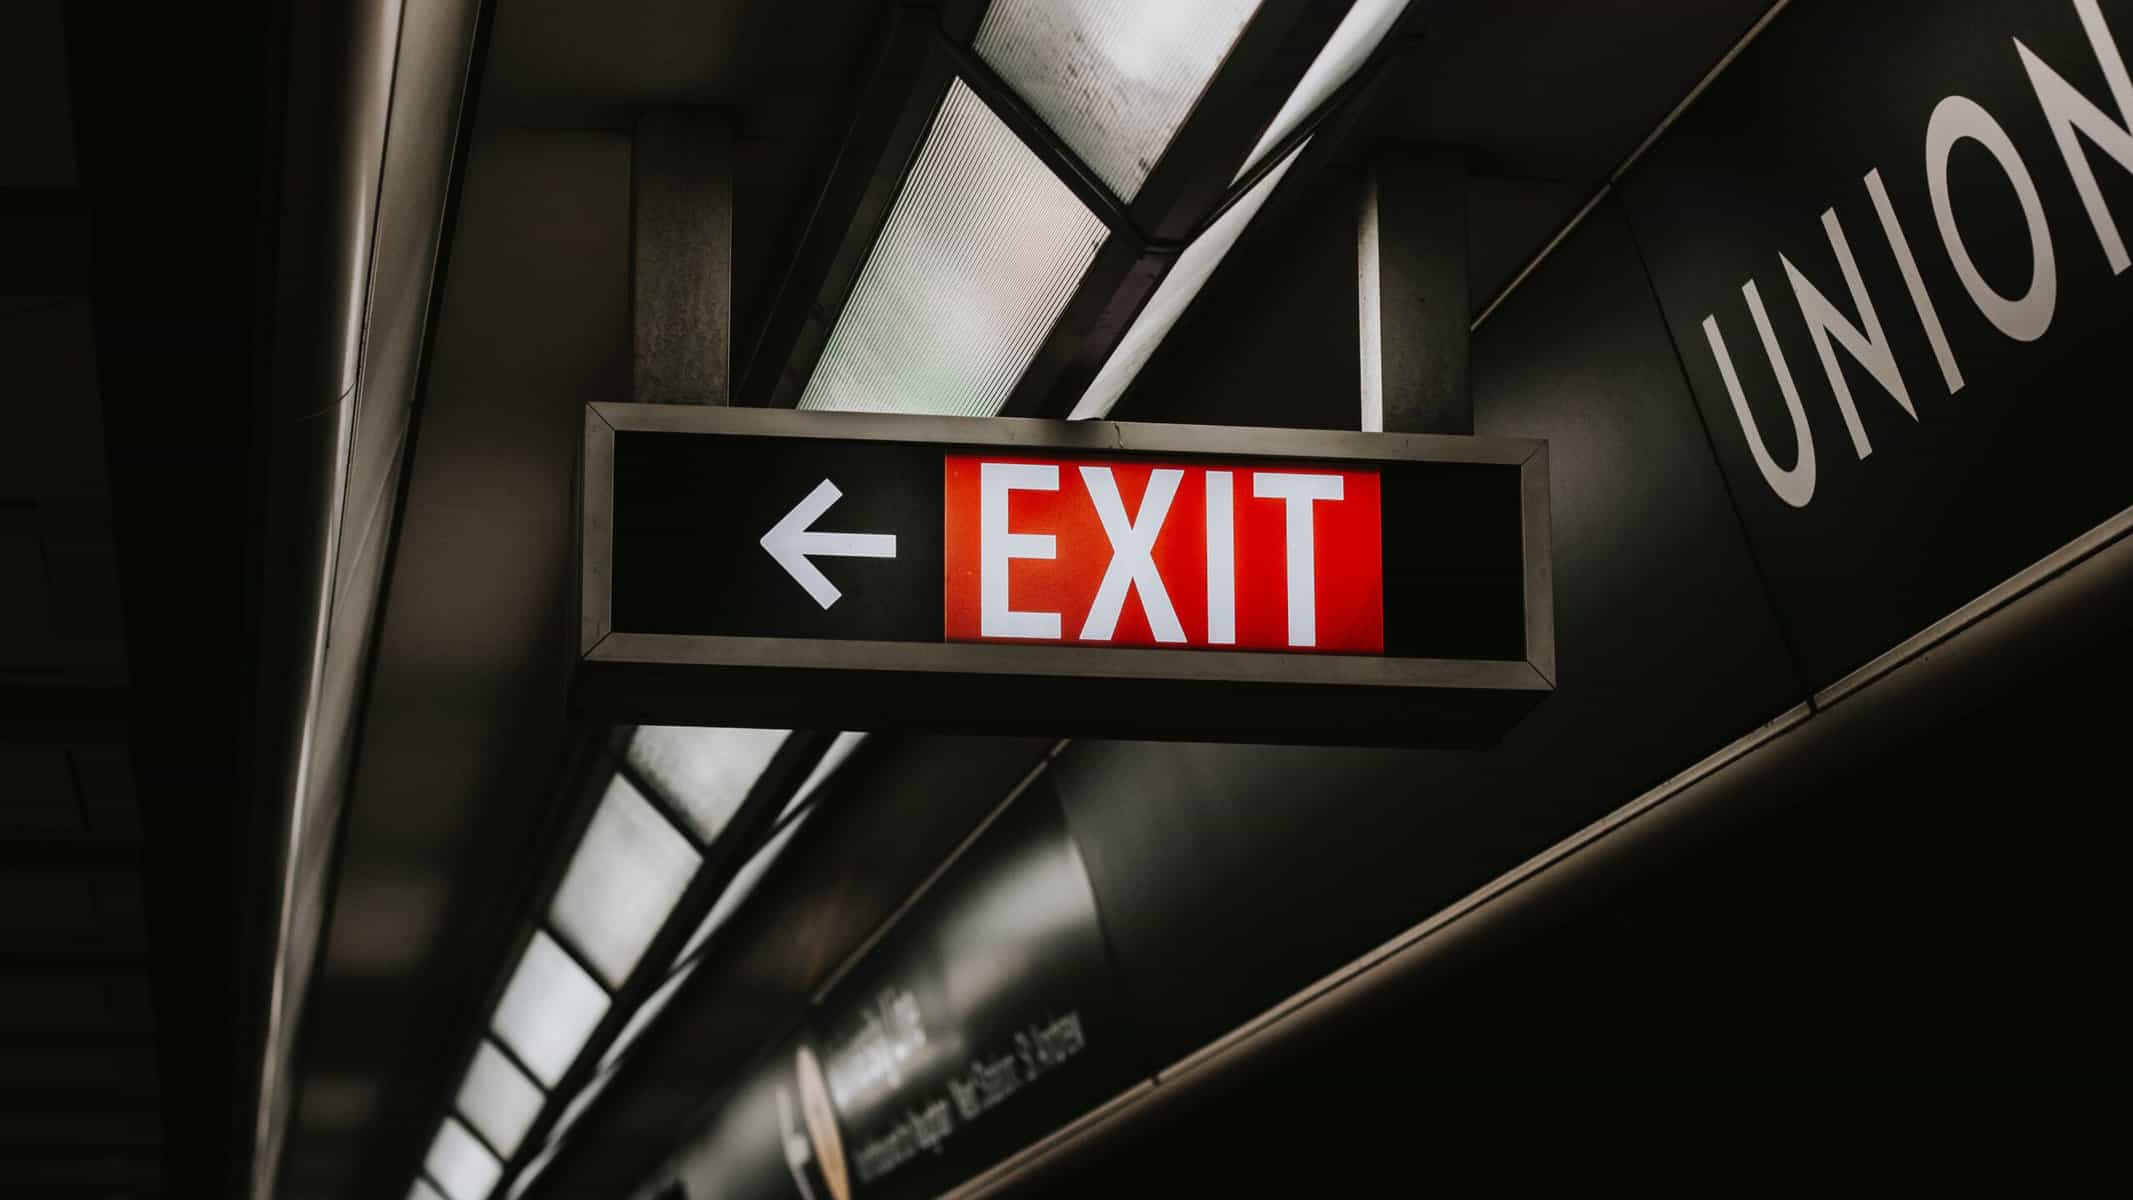 Subway station with a prominent exit sign